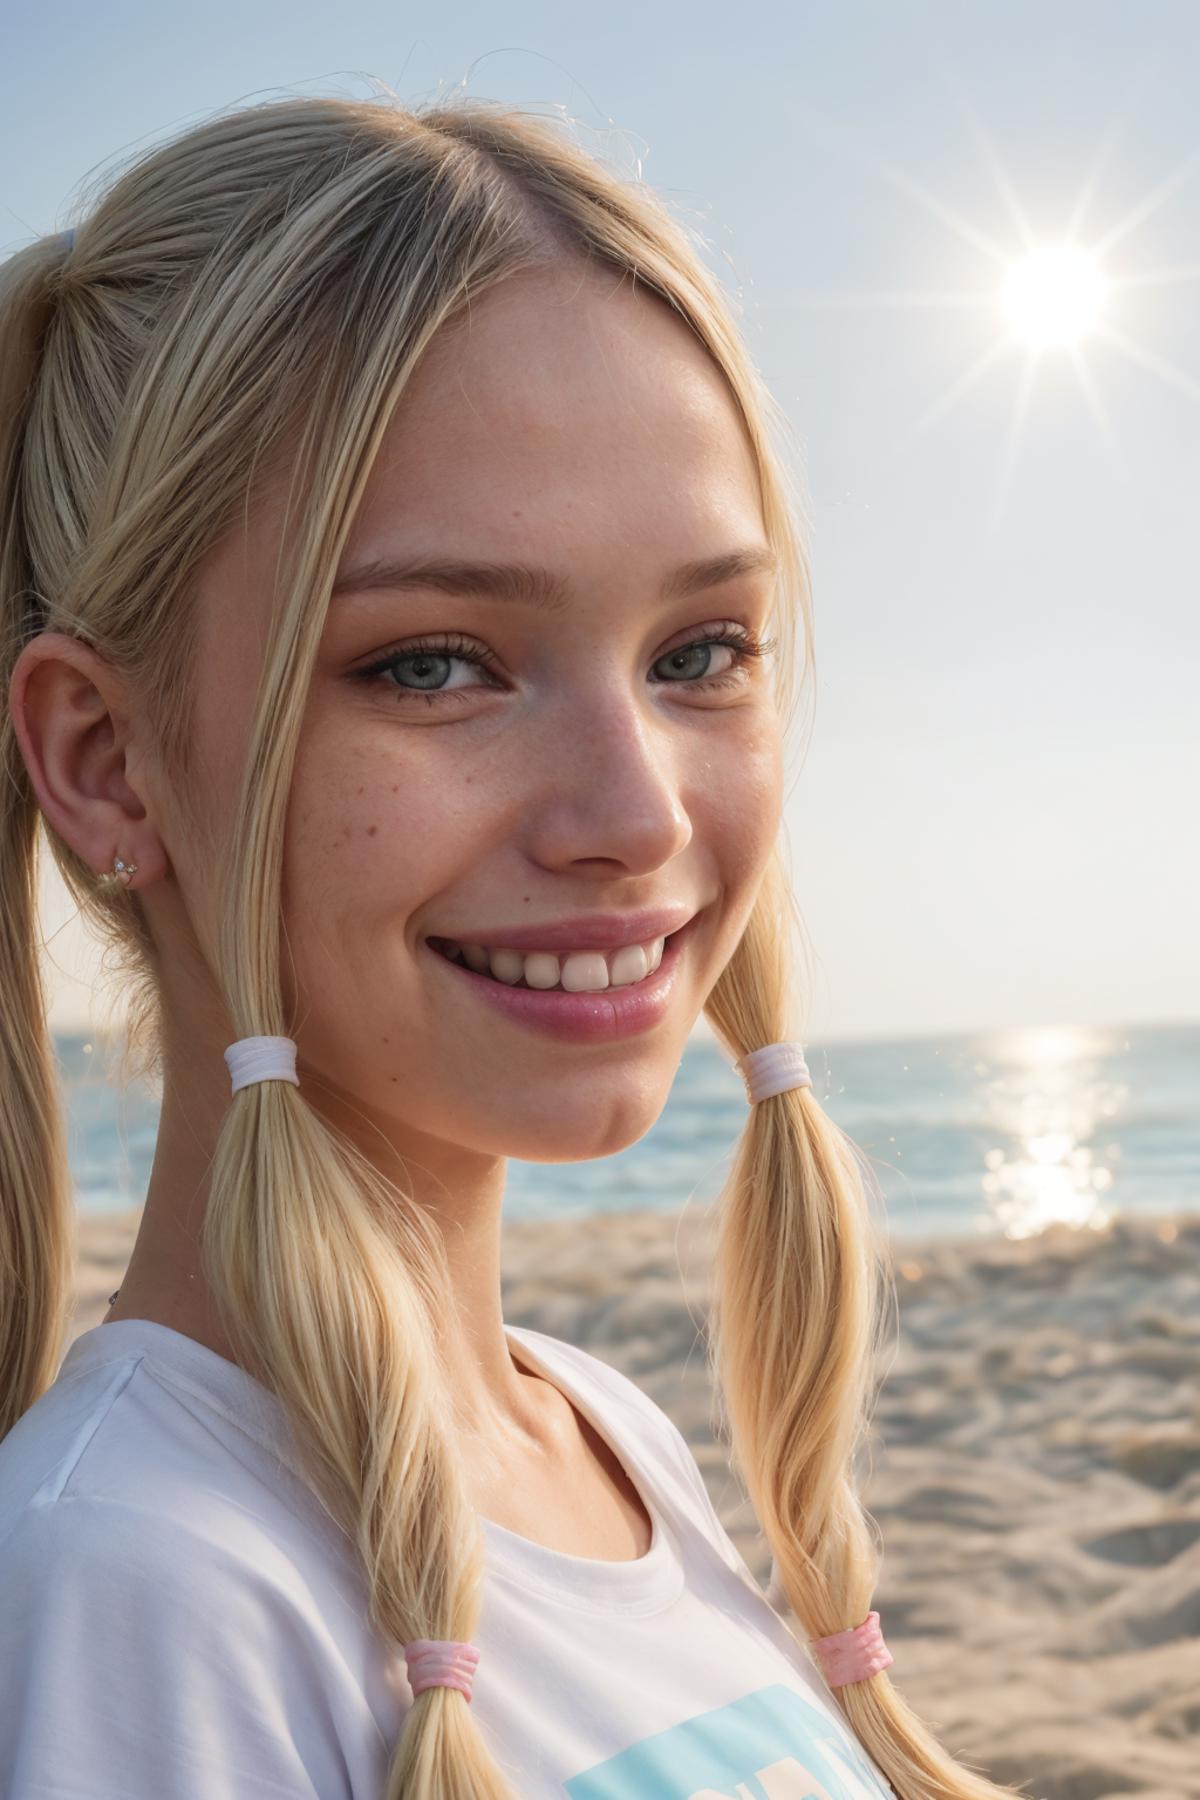 A beautiful blonde woman with pigtails smiling on the beach